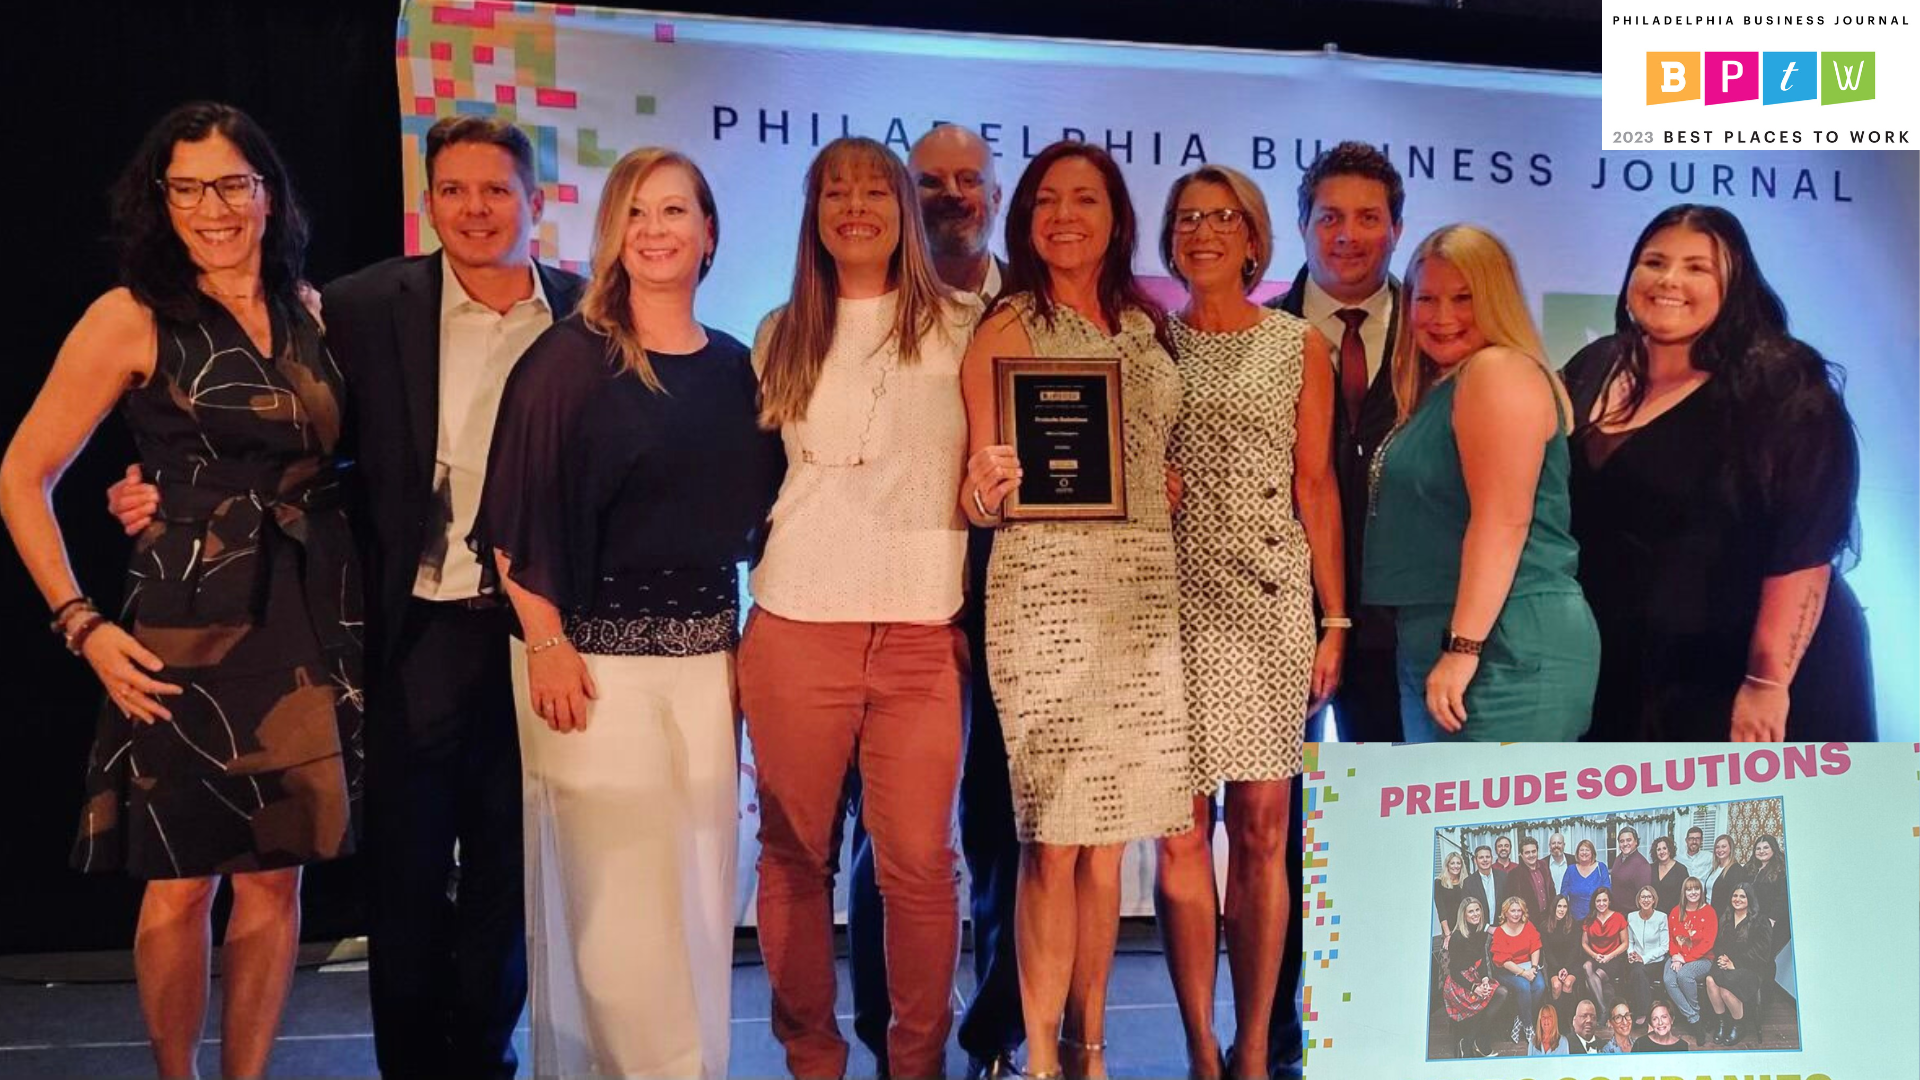 Prelude Solutions employees accepting an award from Philadelphia Business Journal as a best place to work.